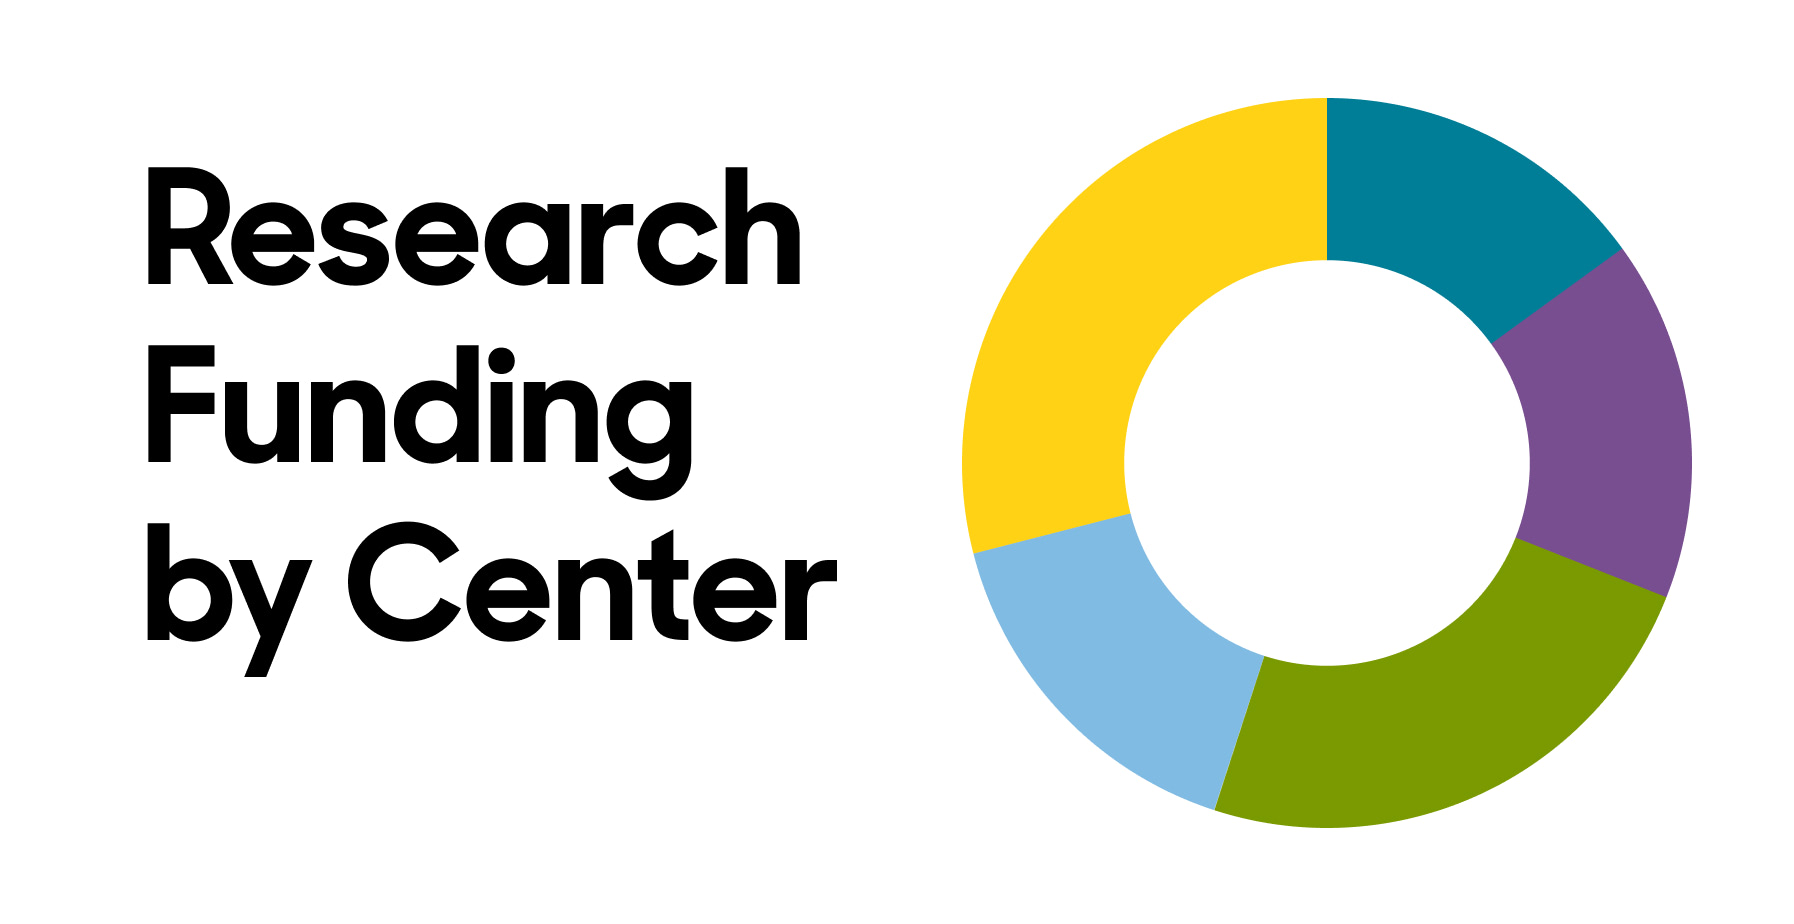 Pie chart illustration of research funding